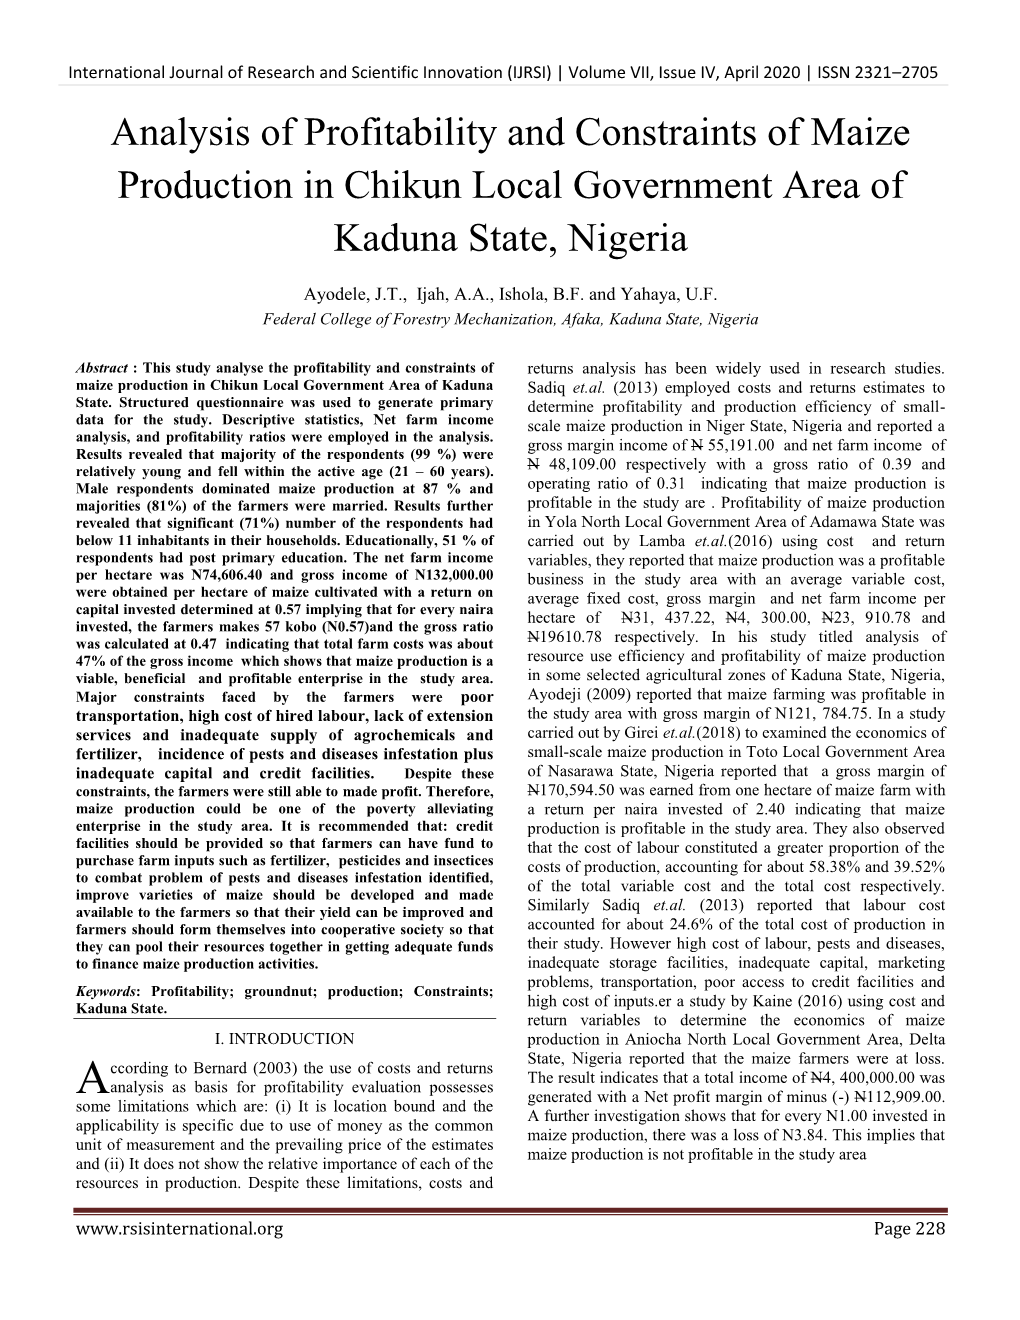 Analysis of Profitability and Constraints of Maize Production in Chikun Local Government Area of Kaduna State, Nigeria